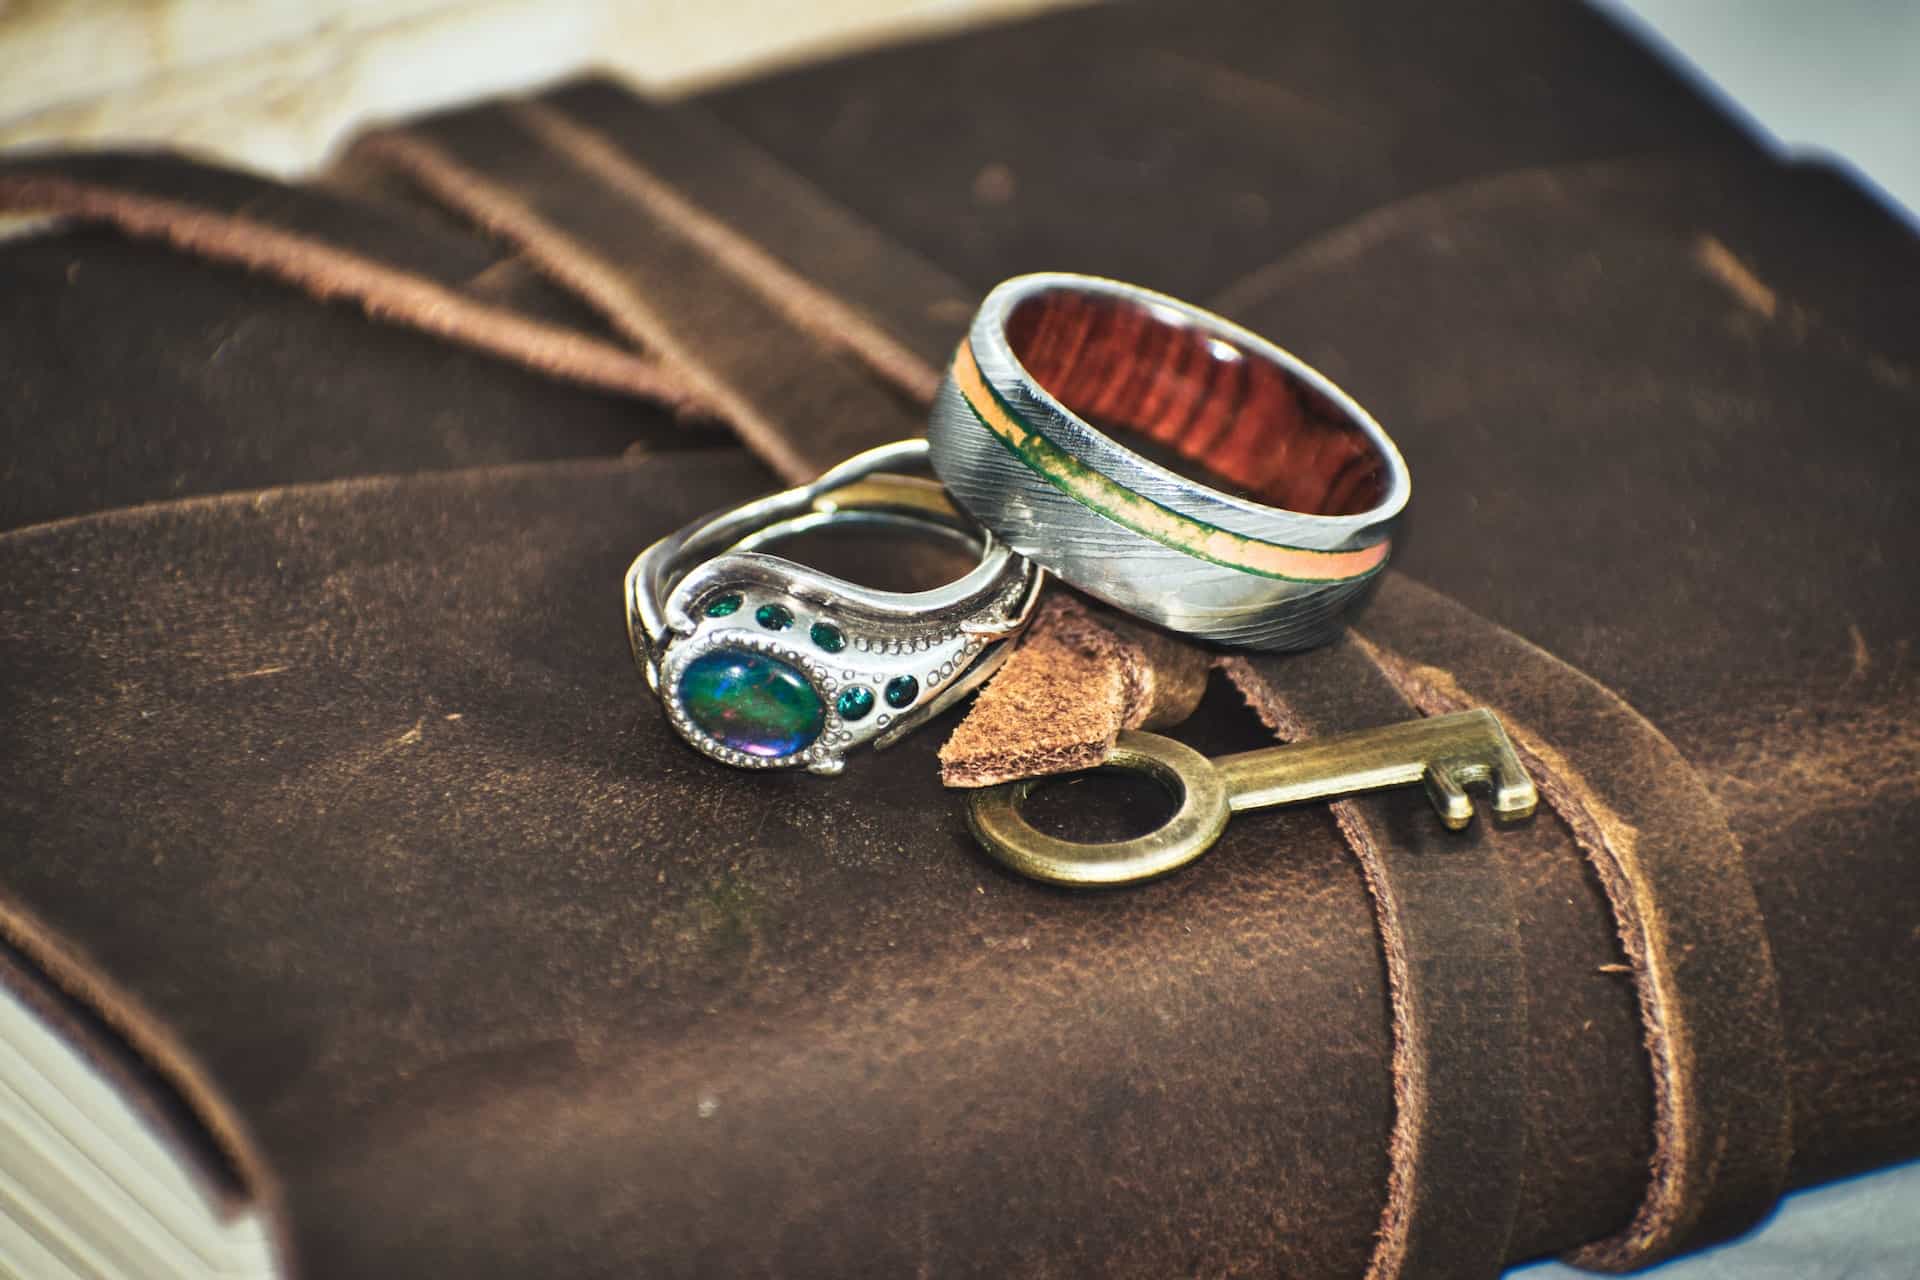 Rings and a Key Sitting on a Leatherbound Book